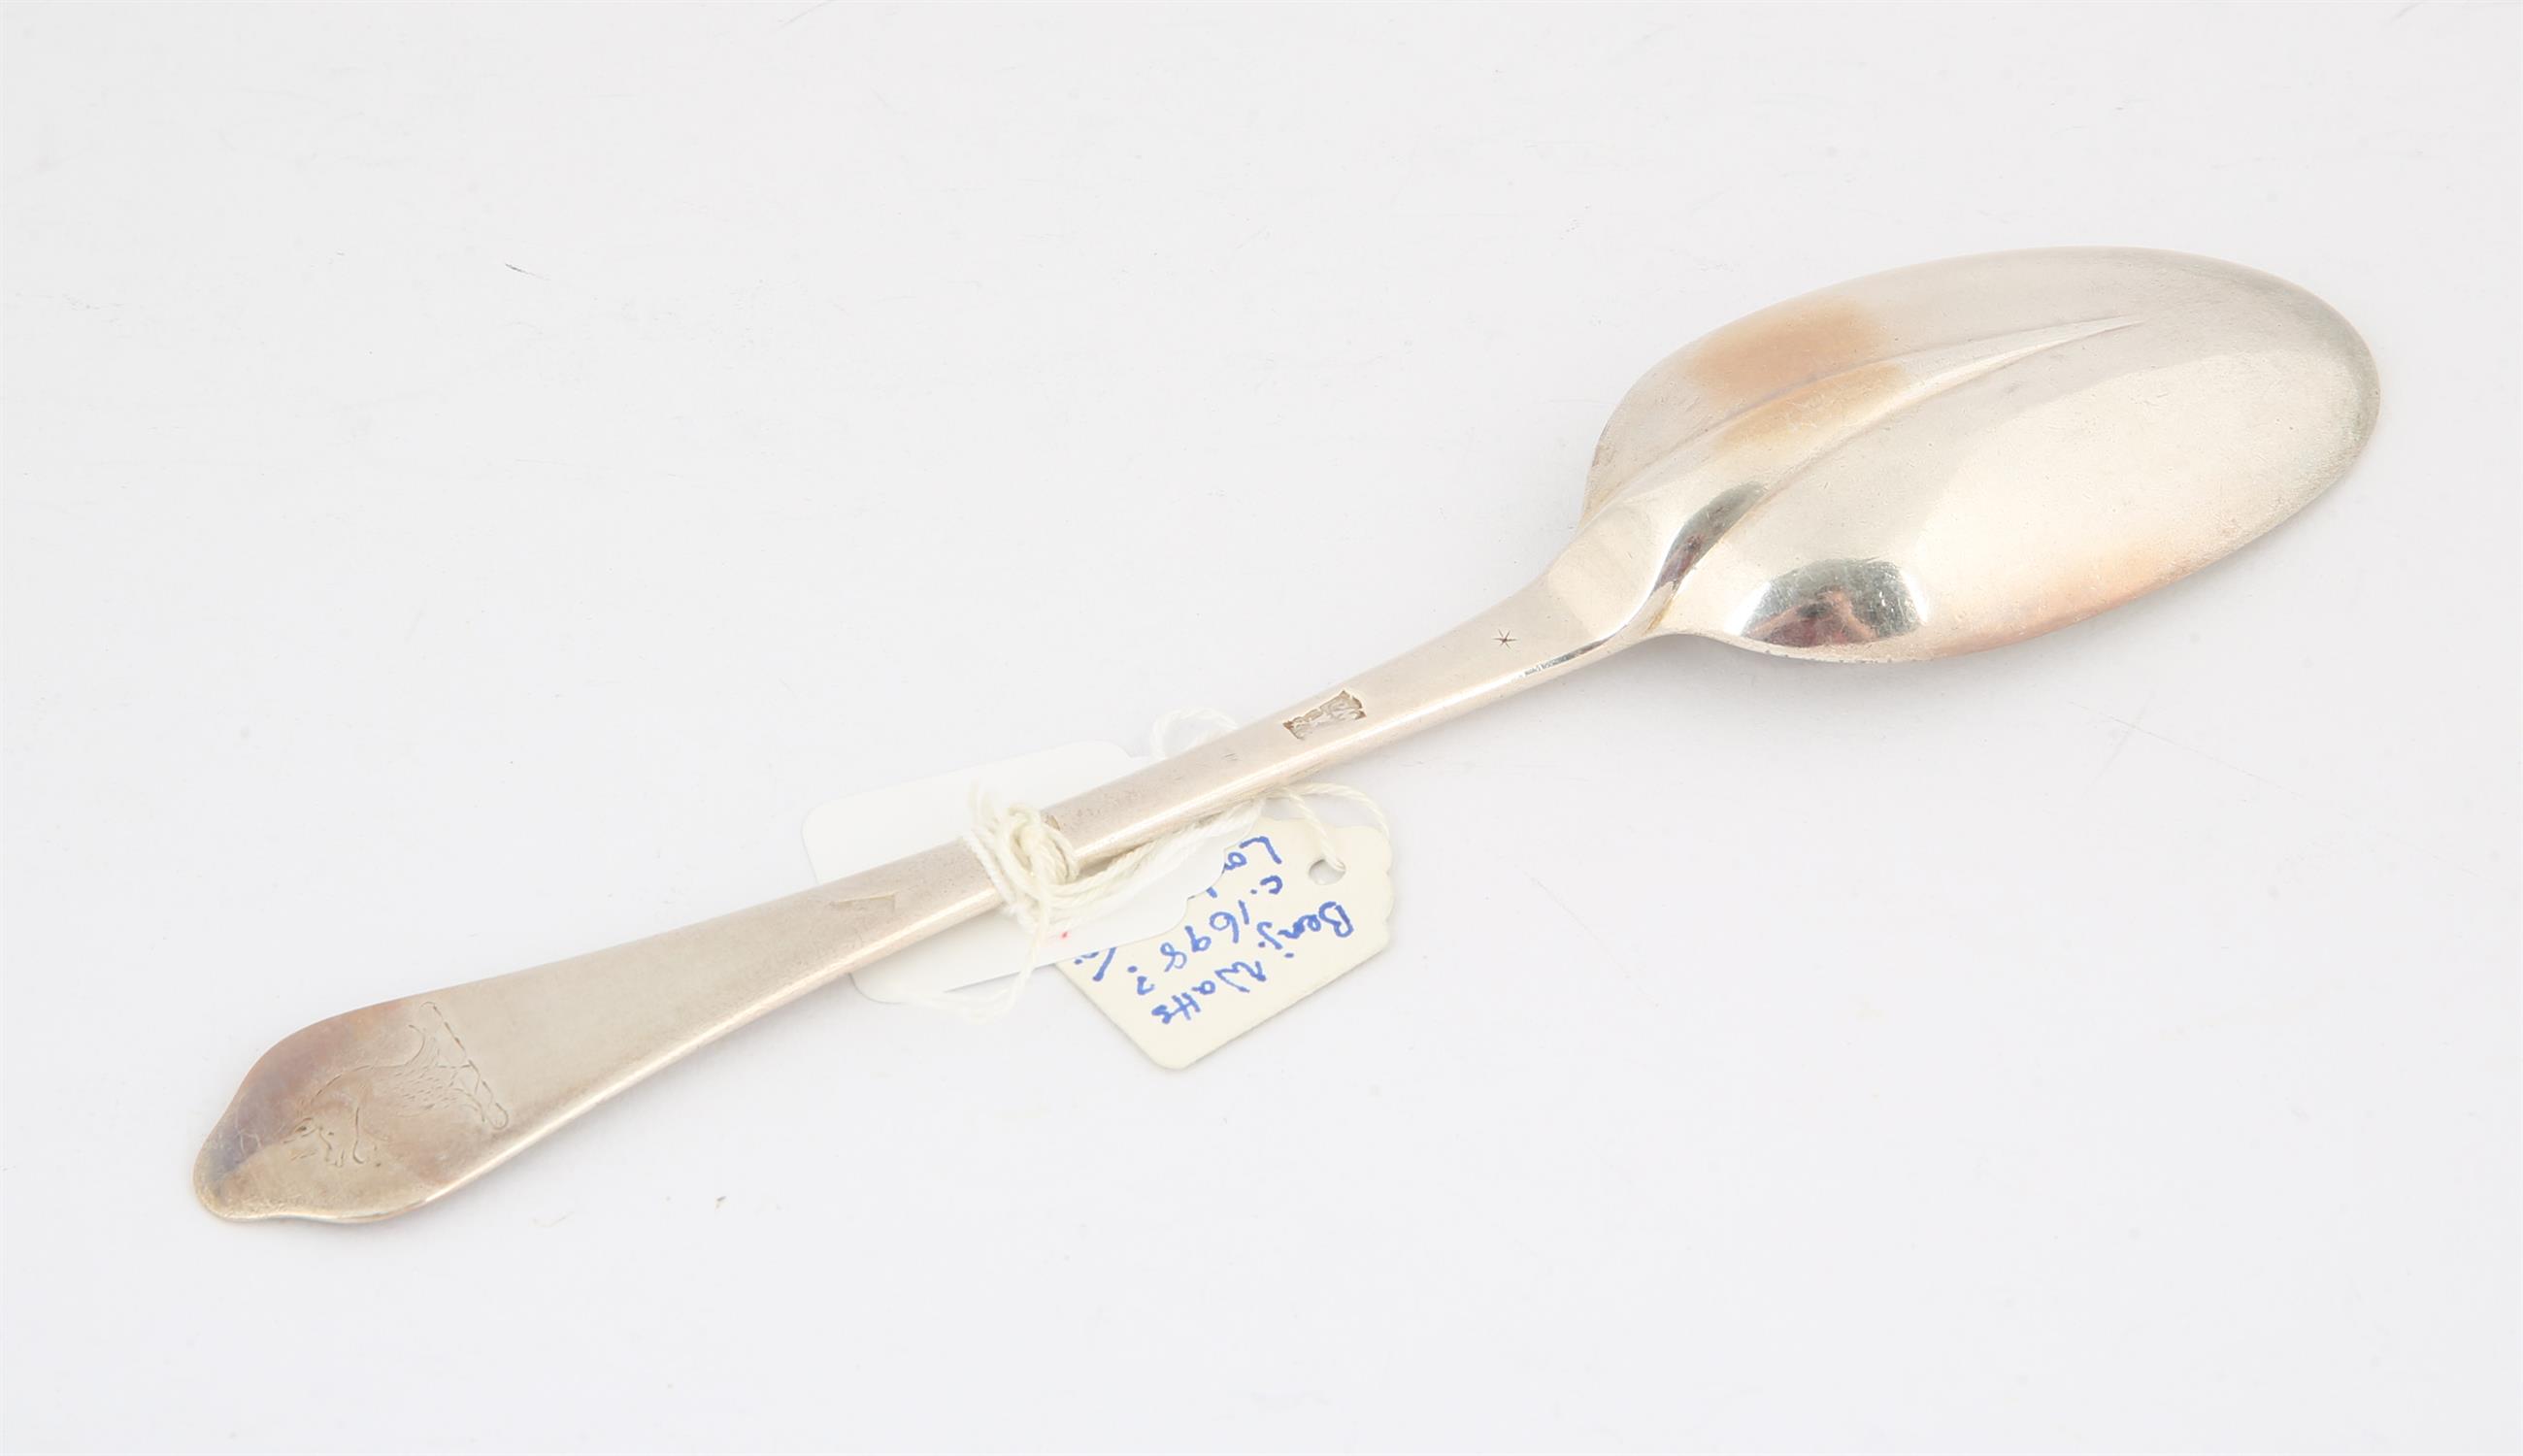 Late 17th century dog nose silver spoon, possibly by Benjamin Watts SILVER COLLECTION OF SIR RAY - Image 4 of 4